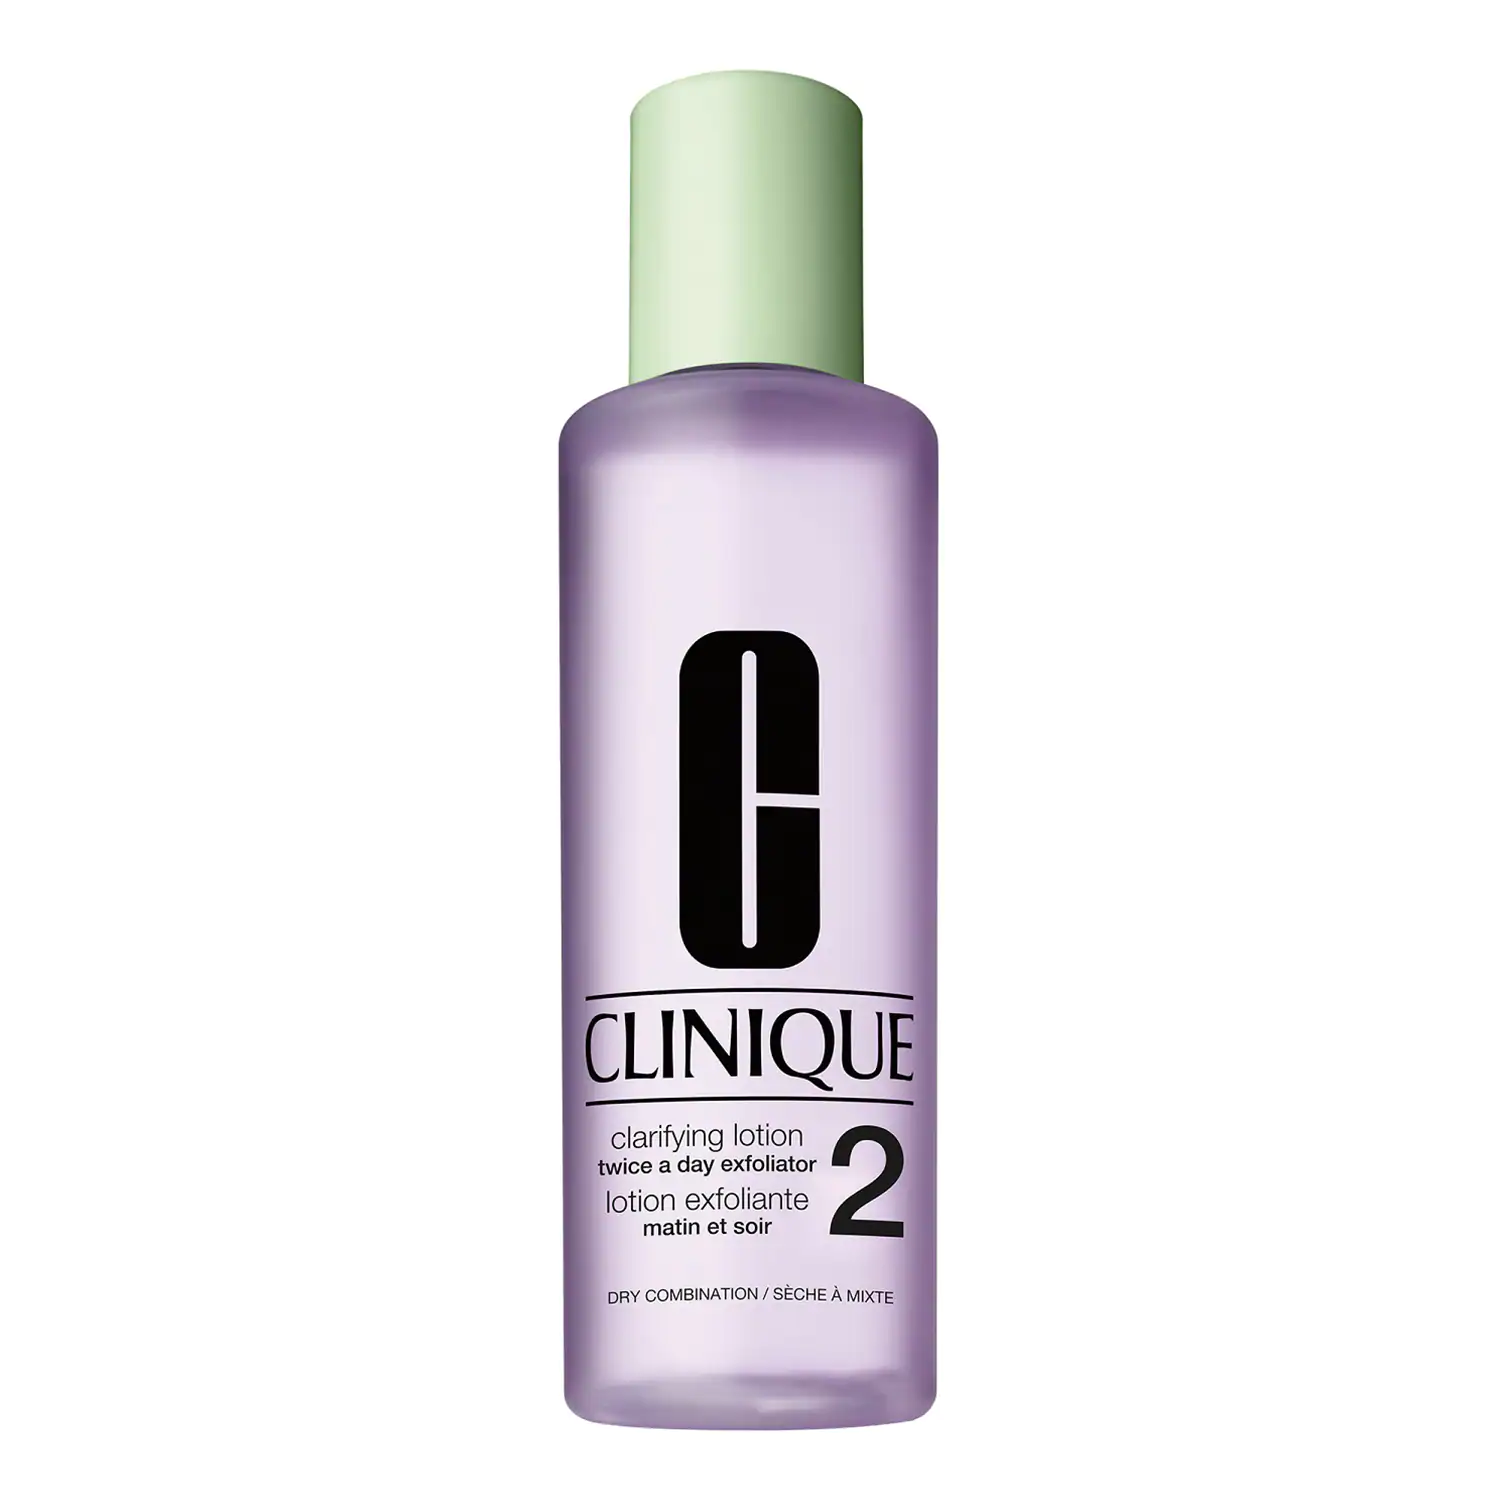 Clinique Clarifying Lotion 2  487 ml